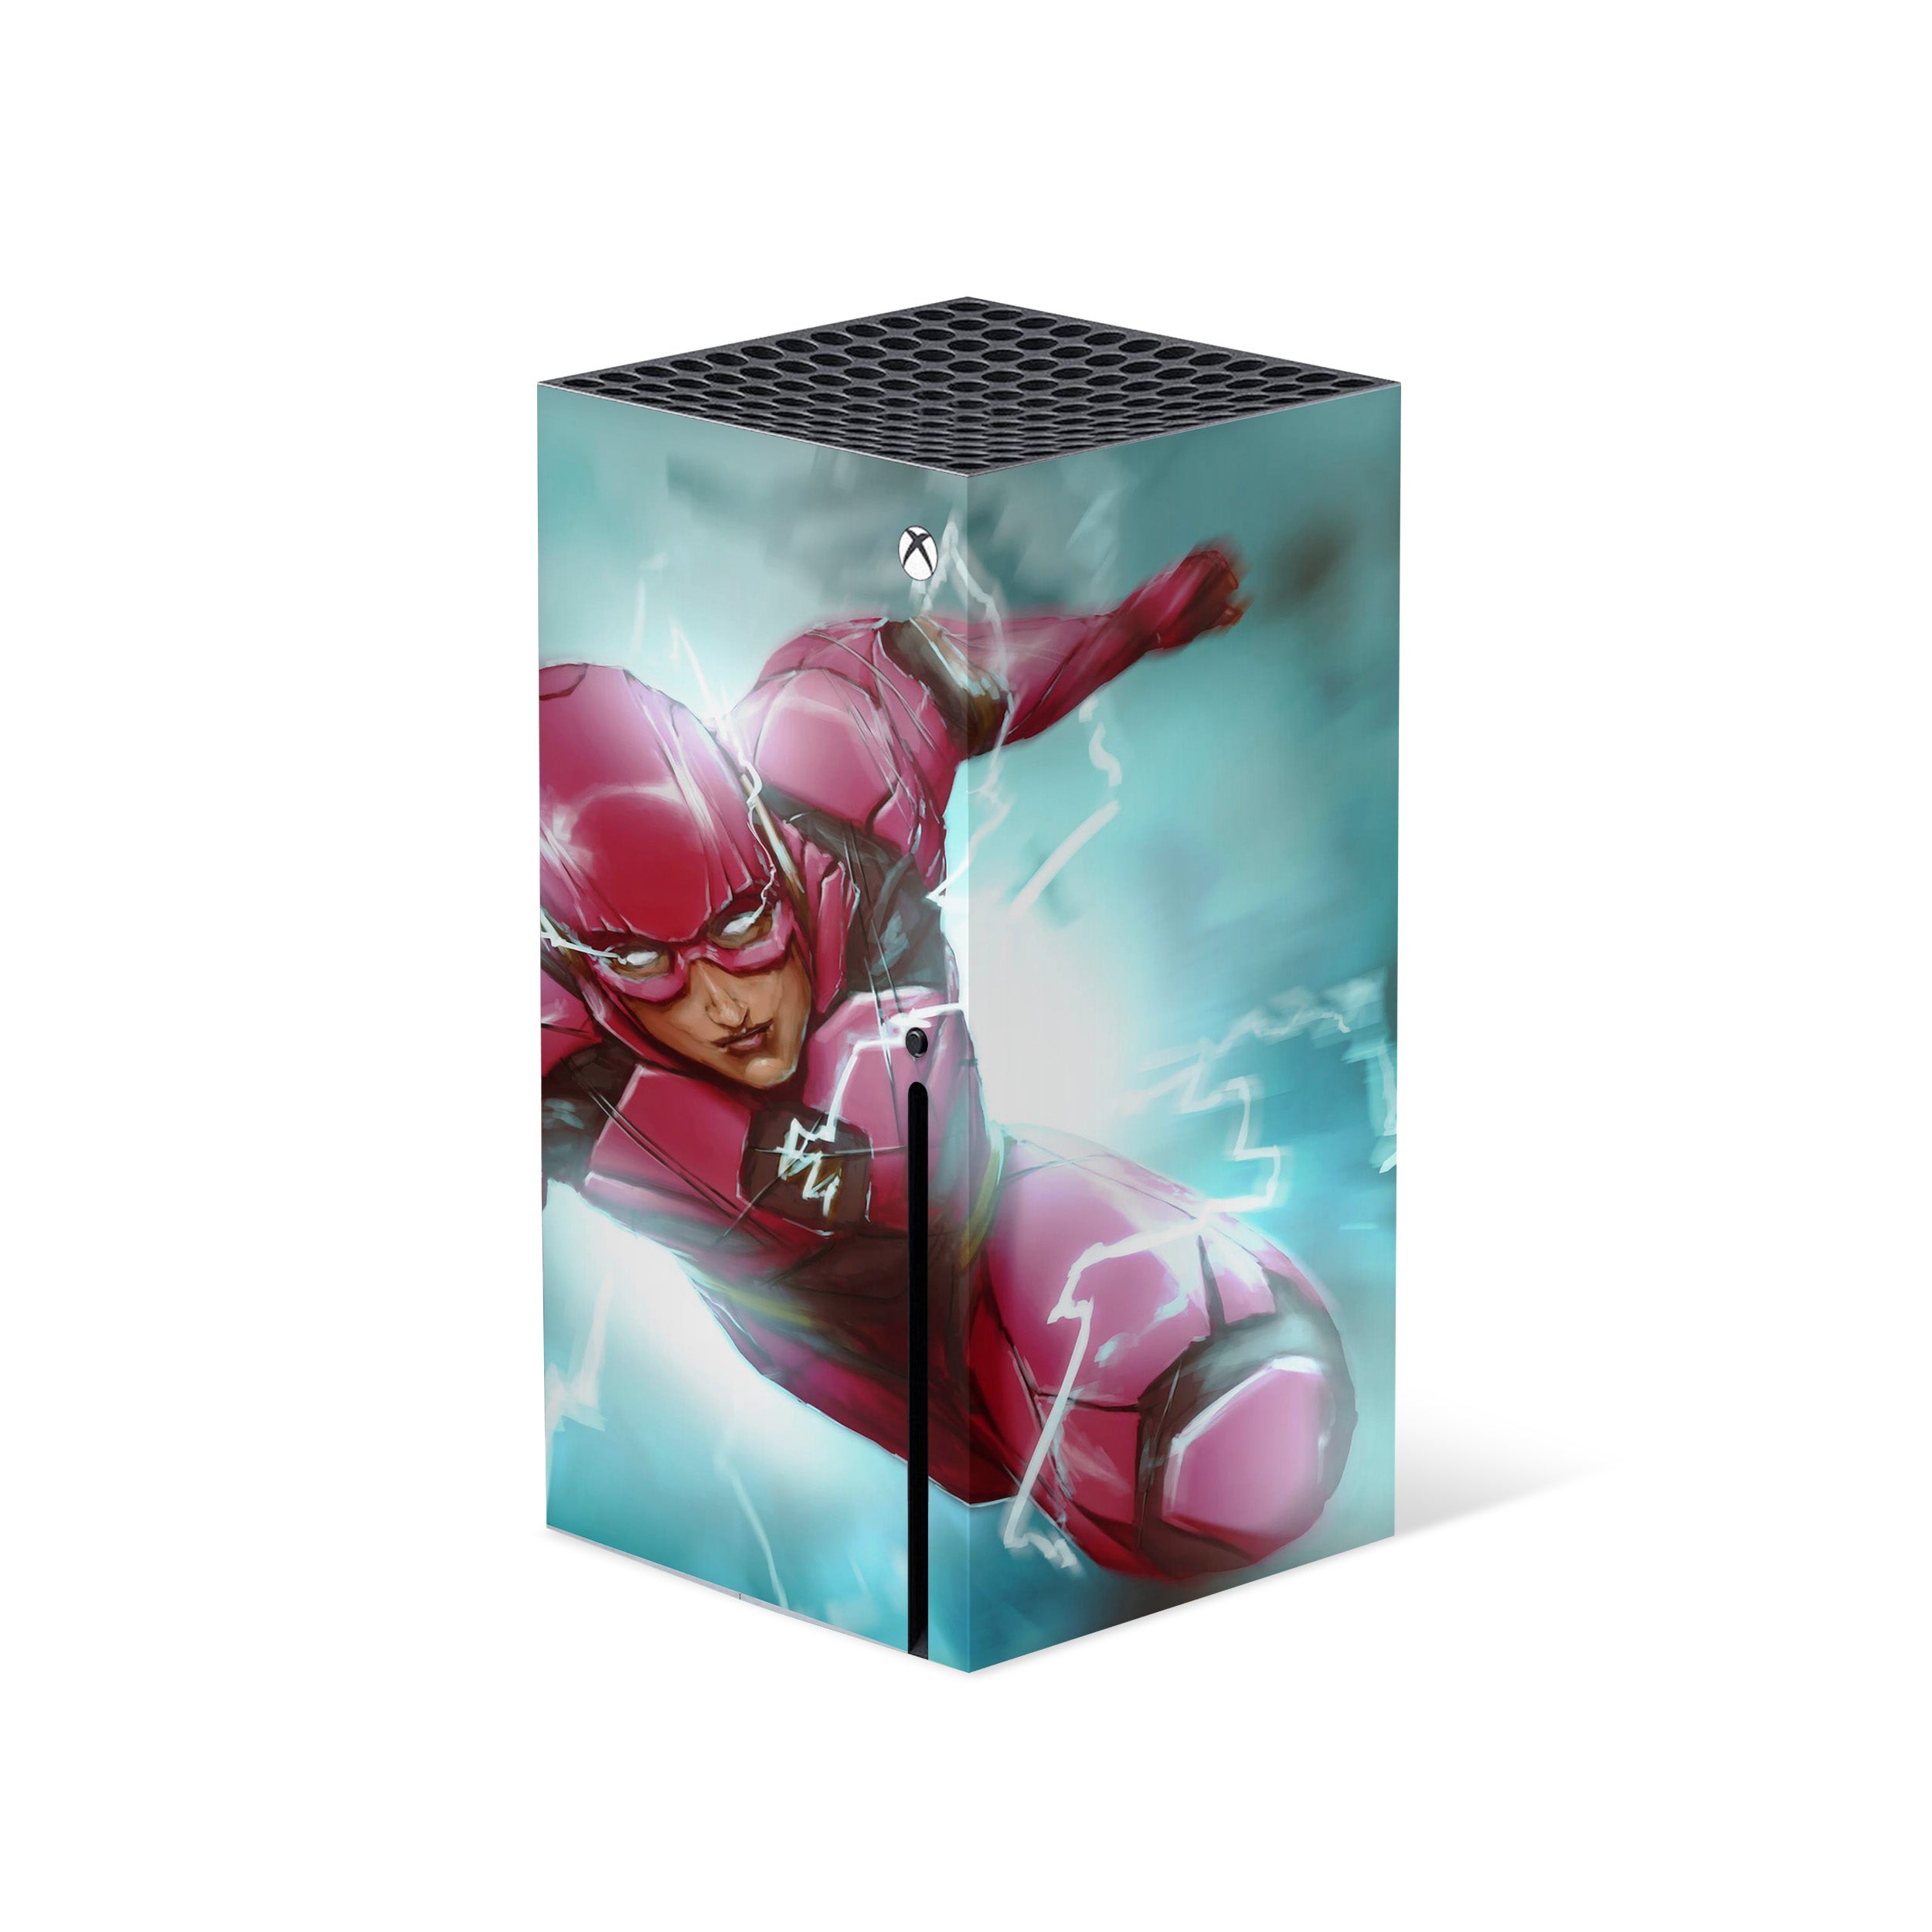 A video game skin featuring a Marvel Flash design for the Xbox Series X.